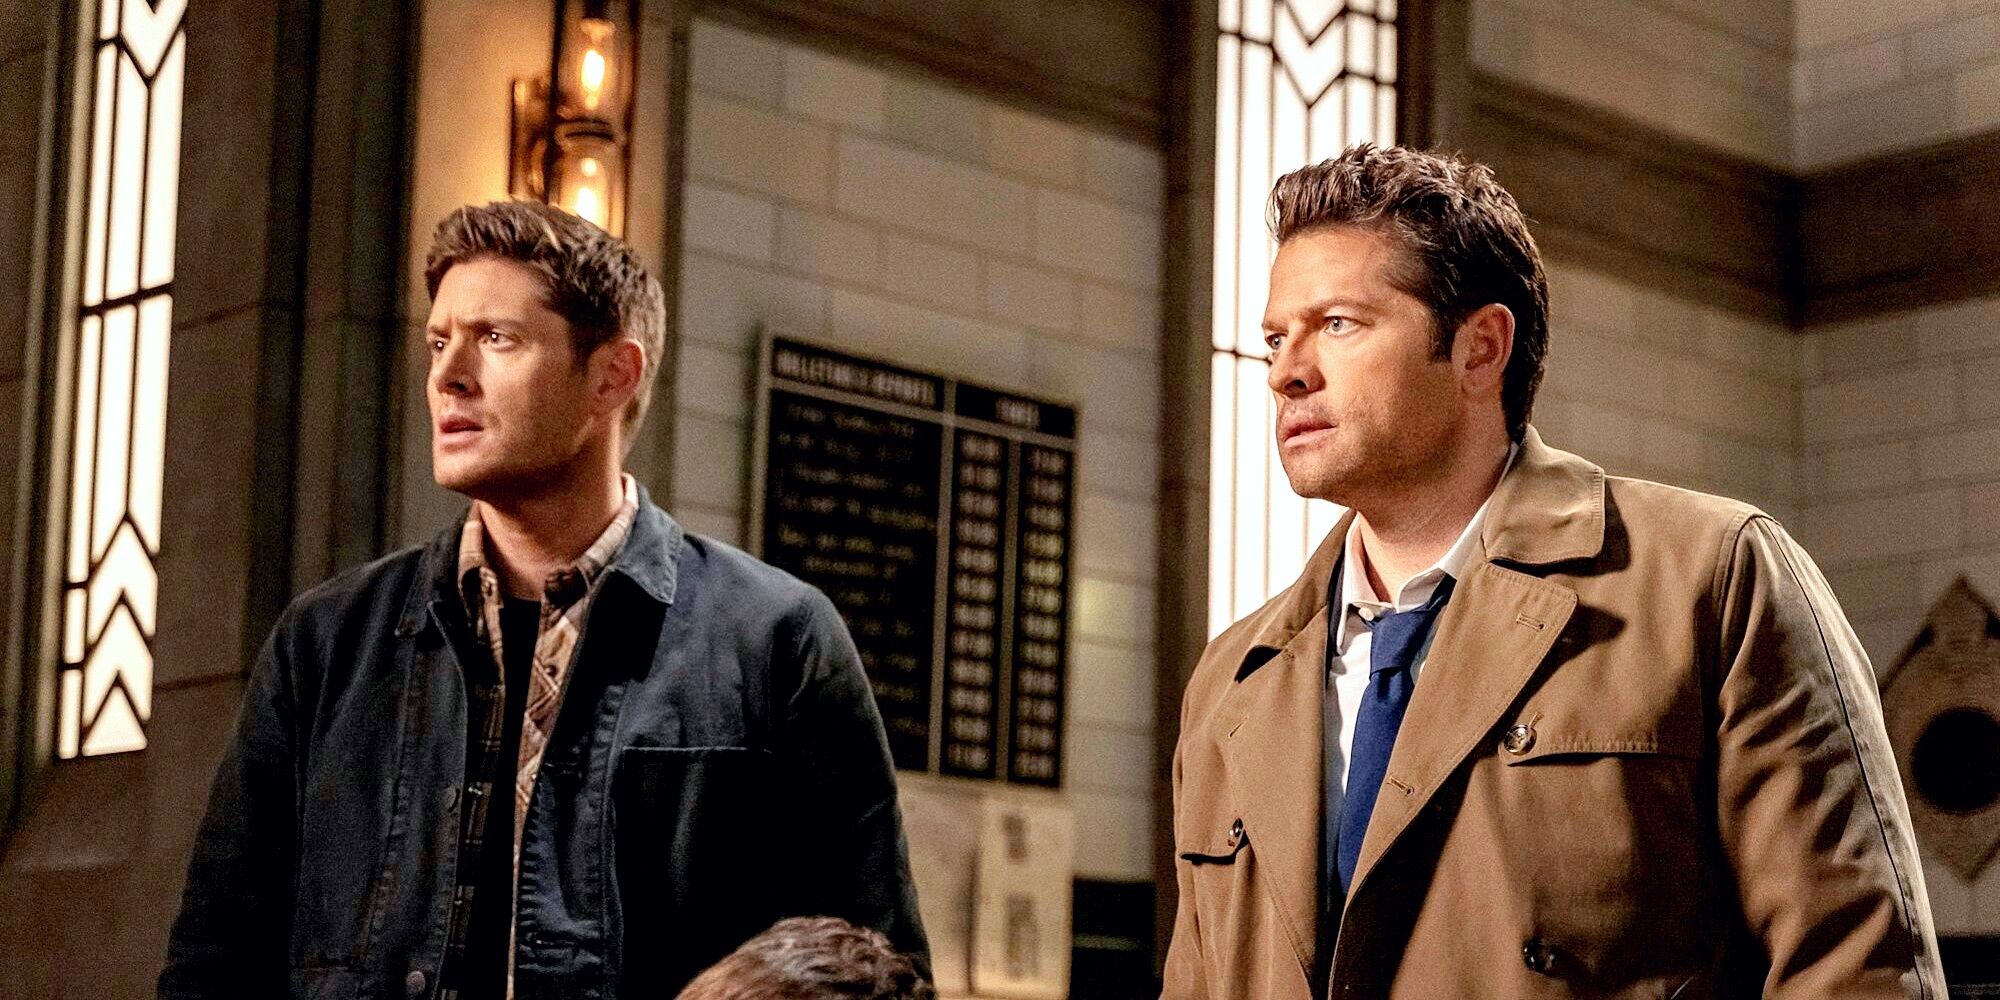 Jensen Ackles as Dean and Misha Collins as Castiel in Supernatural